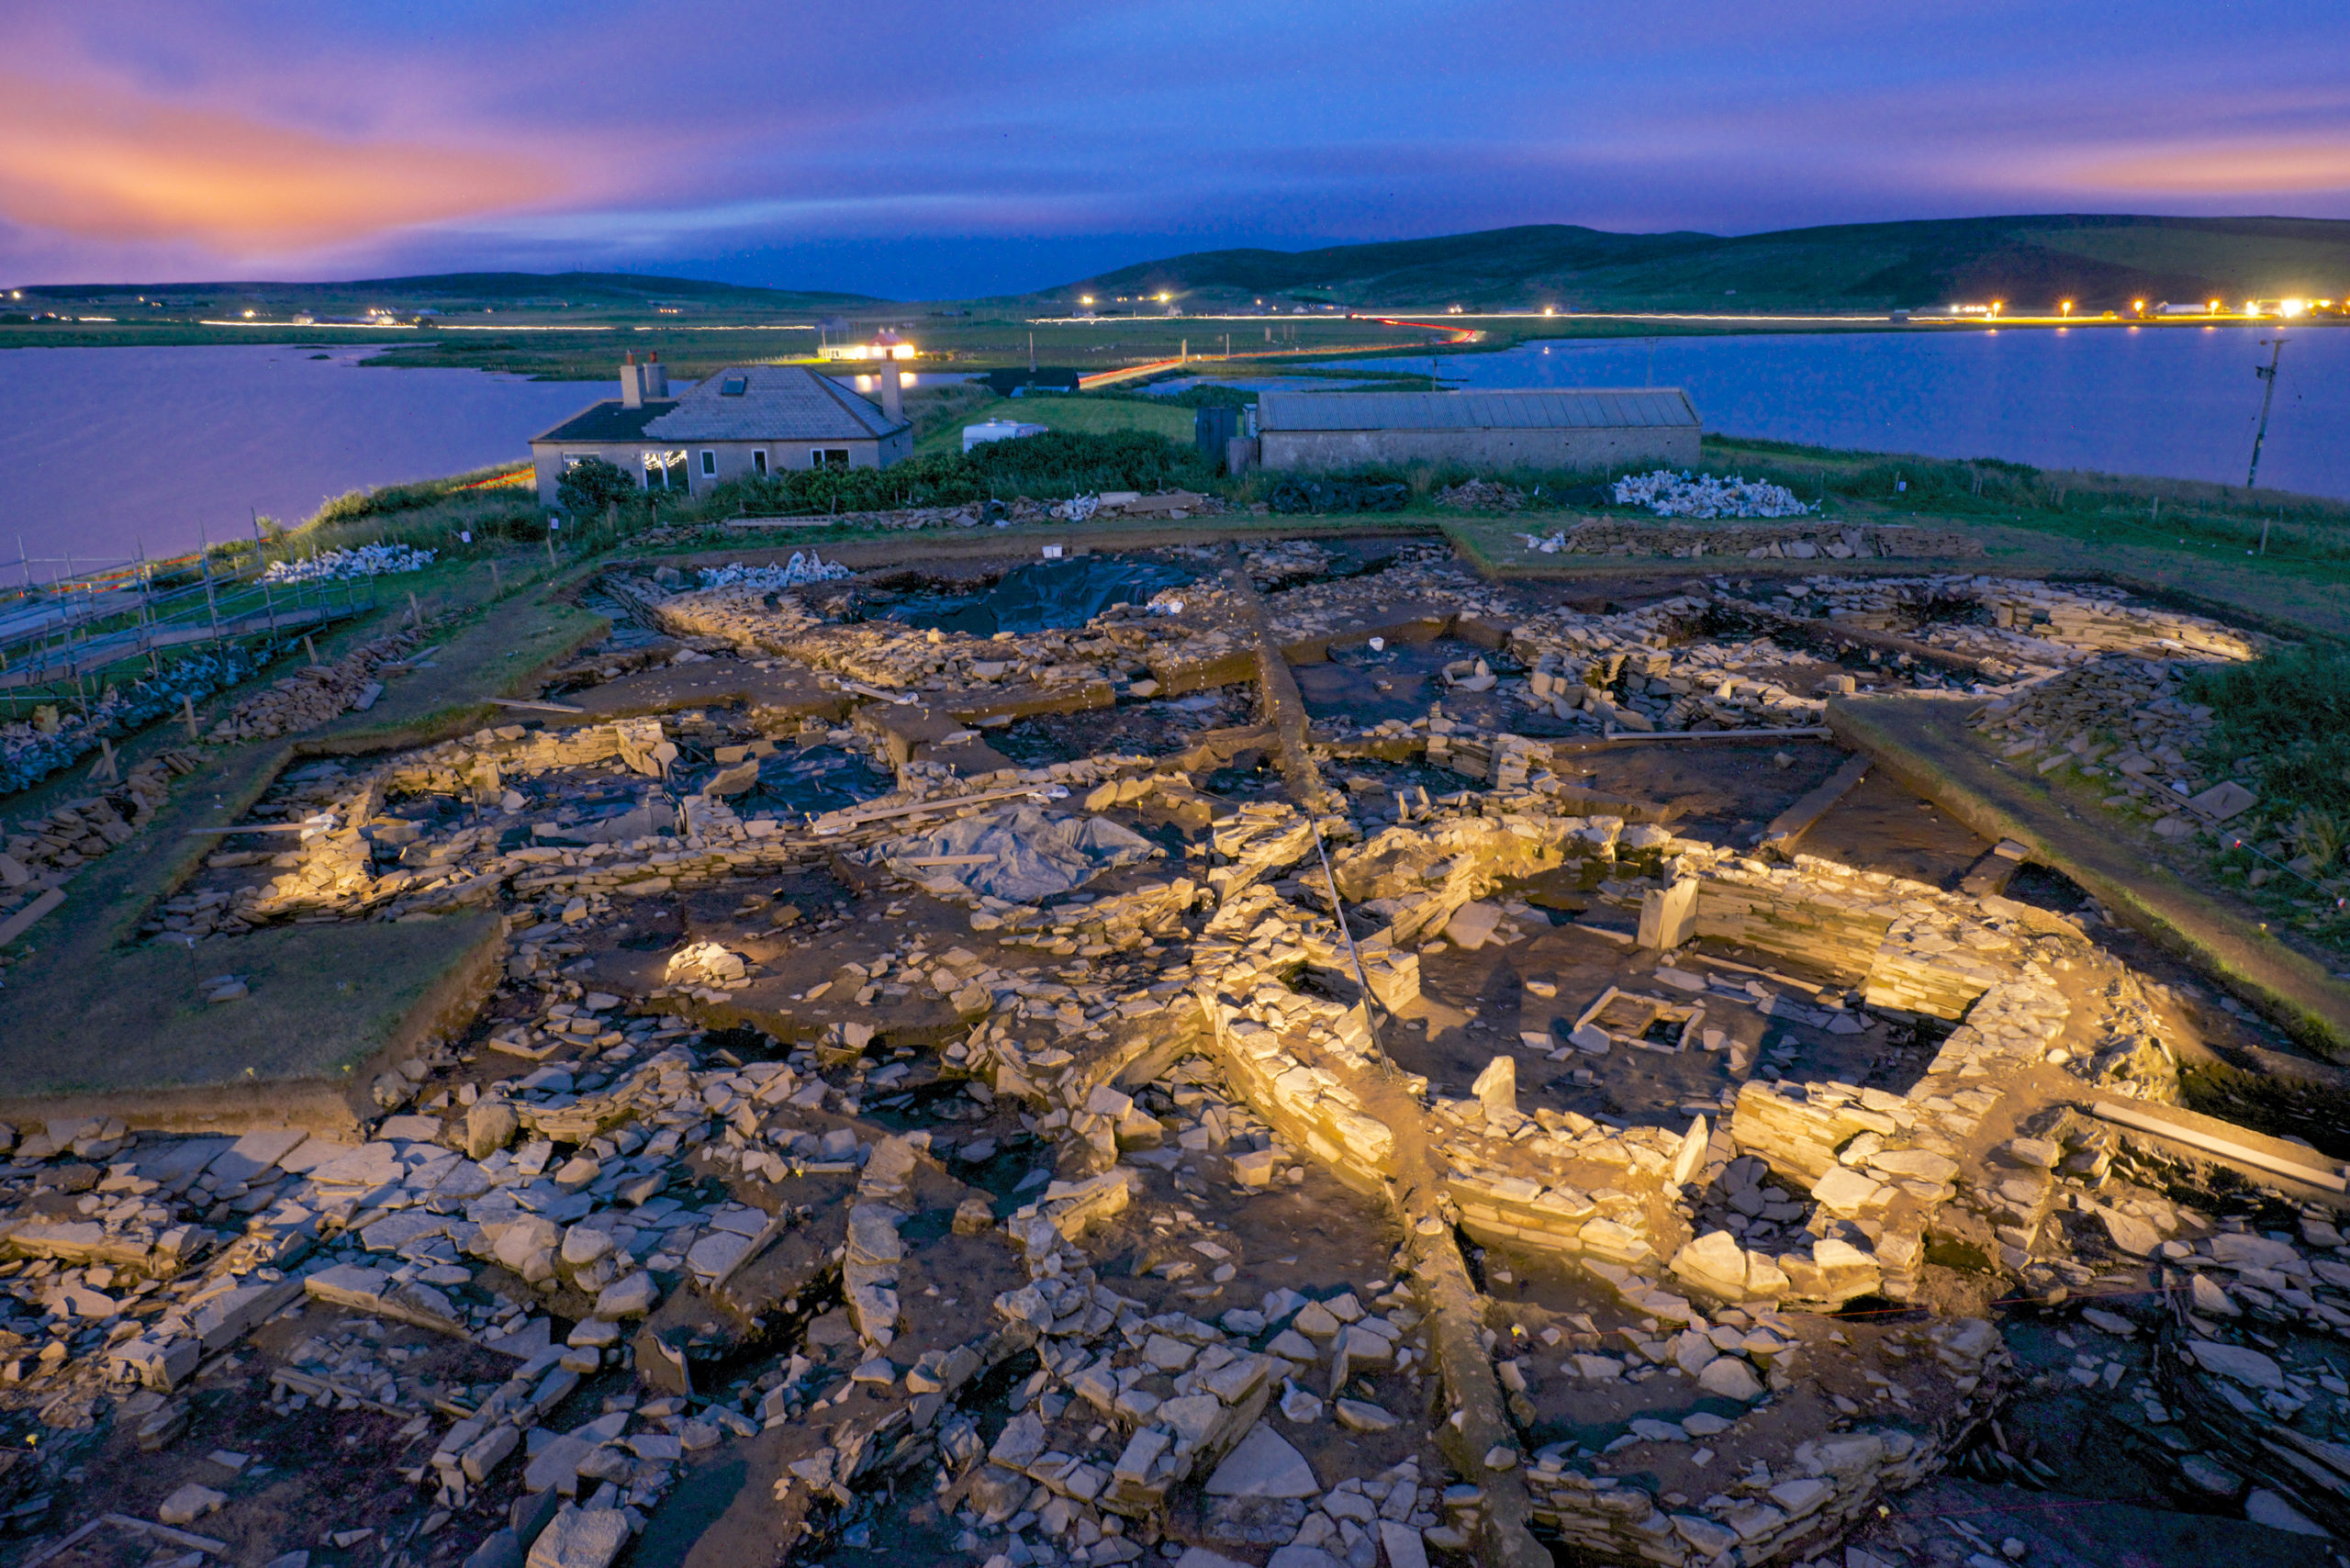 The archeology dig site at the Ness of Brodgar in Orkney that is revealing a Neolithic sacred site hitherto unknown. The dig is under the direction of Nick Card from ORCA in Orkney. Large structures are coming to light after several years of digging, revealing a 1,000 year history of occupation and development at the transitional period between hunter/gatherer society and the coming of agriculture.  Nick Card 
MA MIFA FSAScot
Senior Projects Manager
Orkney Research Centre for Archaeology (ORCA)
c/o Orkney College
East Road
Kirkwall, Orkney
KW15 1LX

Nick.Card@orkney.uhi.ac.uk 
Tel: 01856 569342 
Mobile: 07715793699